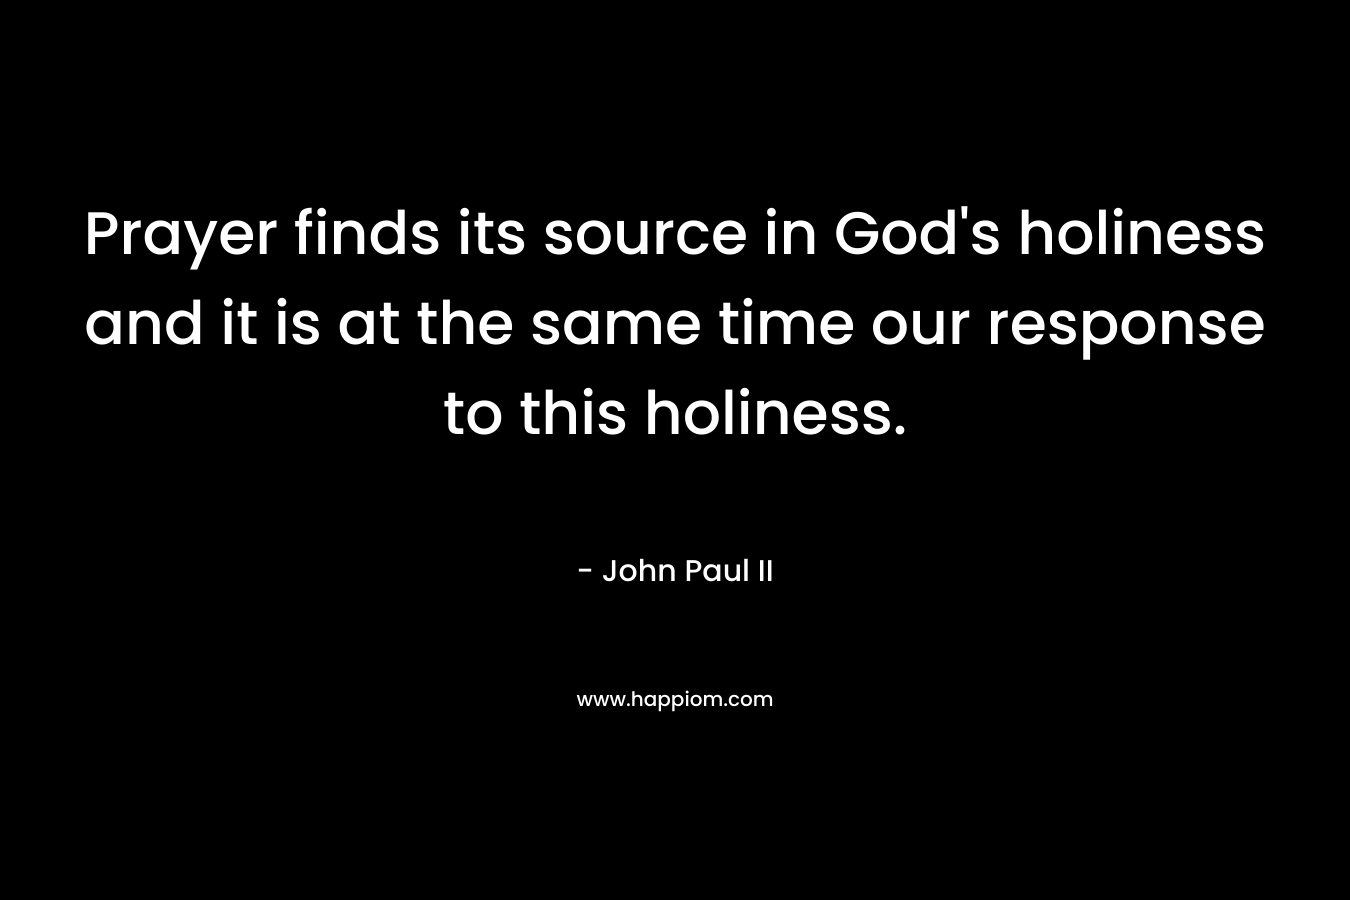 Prayer finds its source in God's holiness and it is at the same time our response to this holiness.